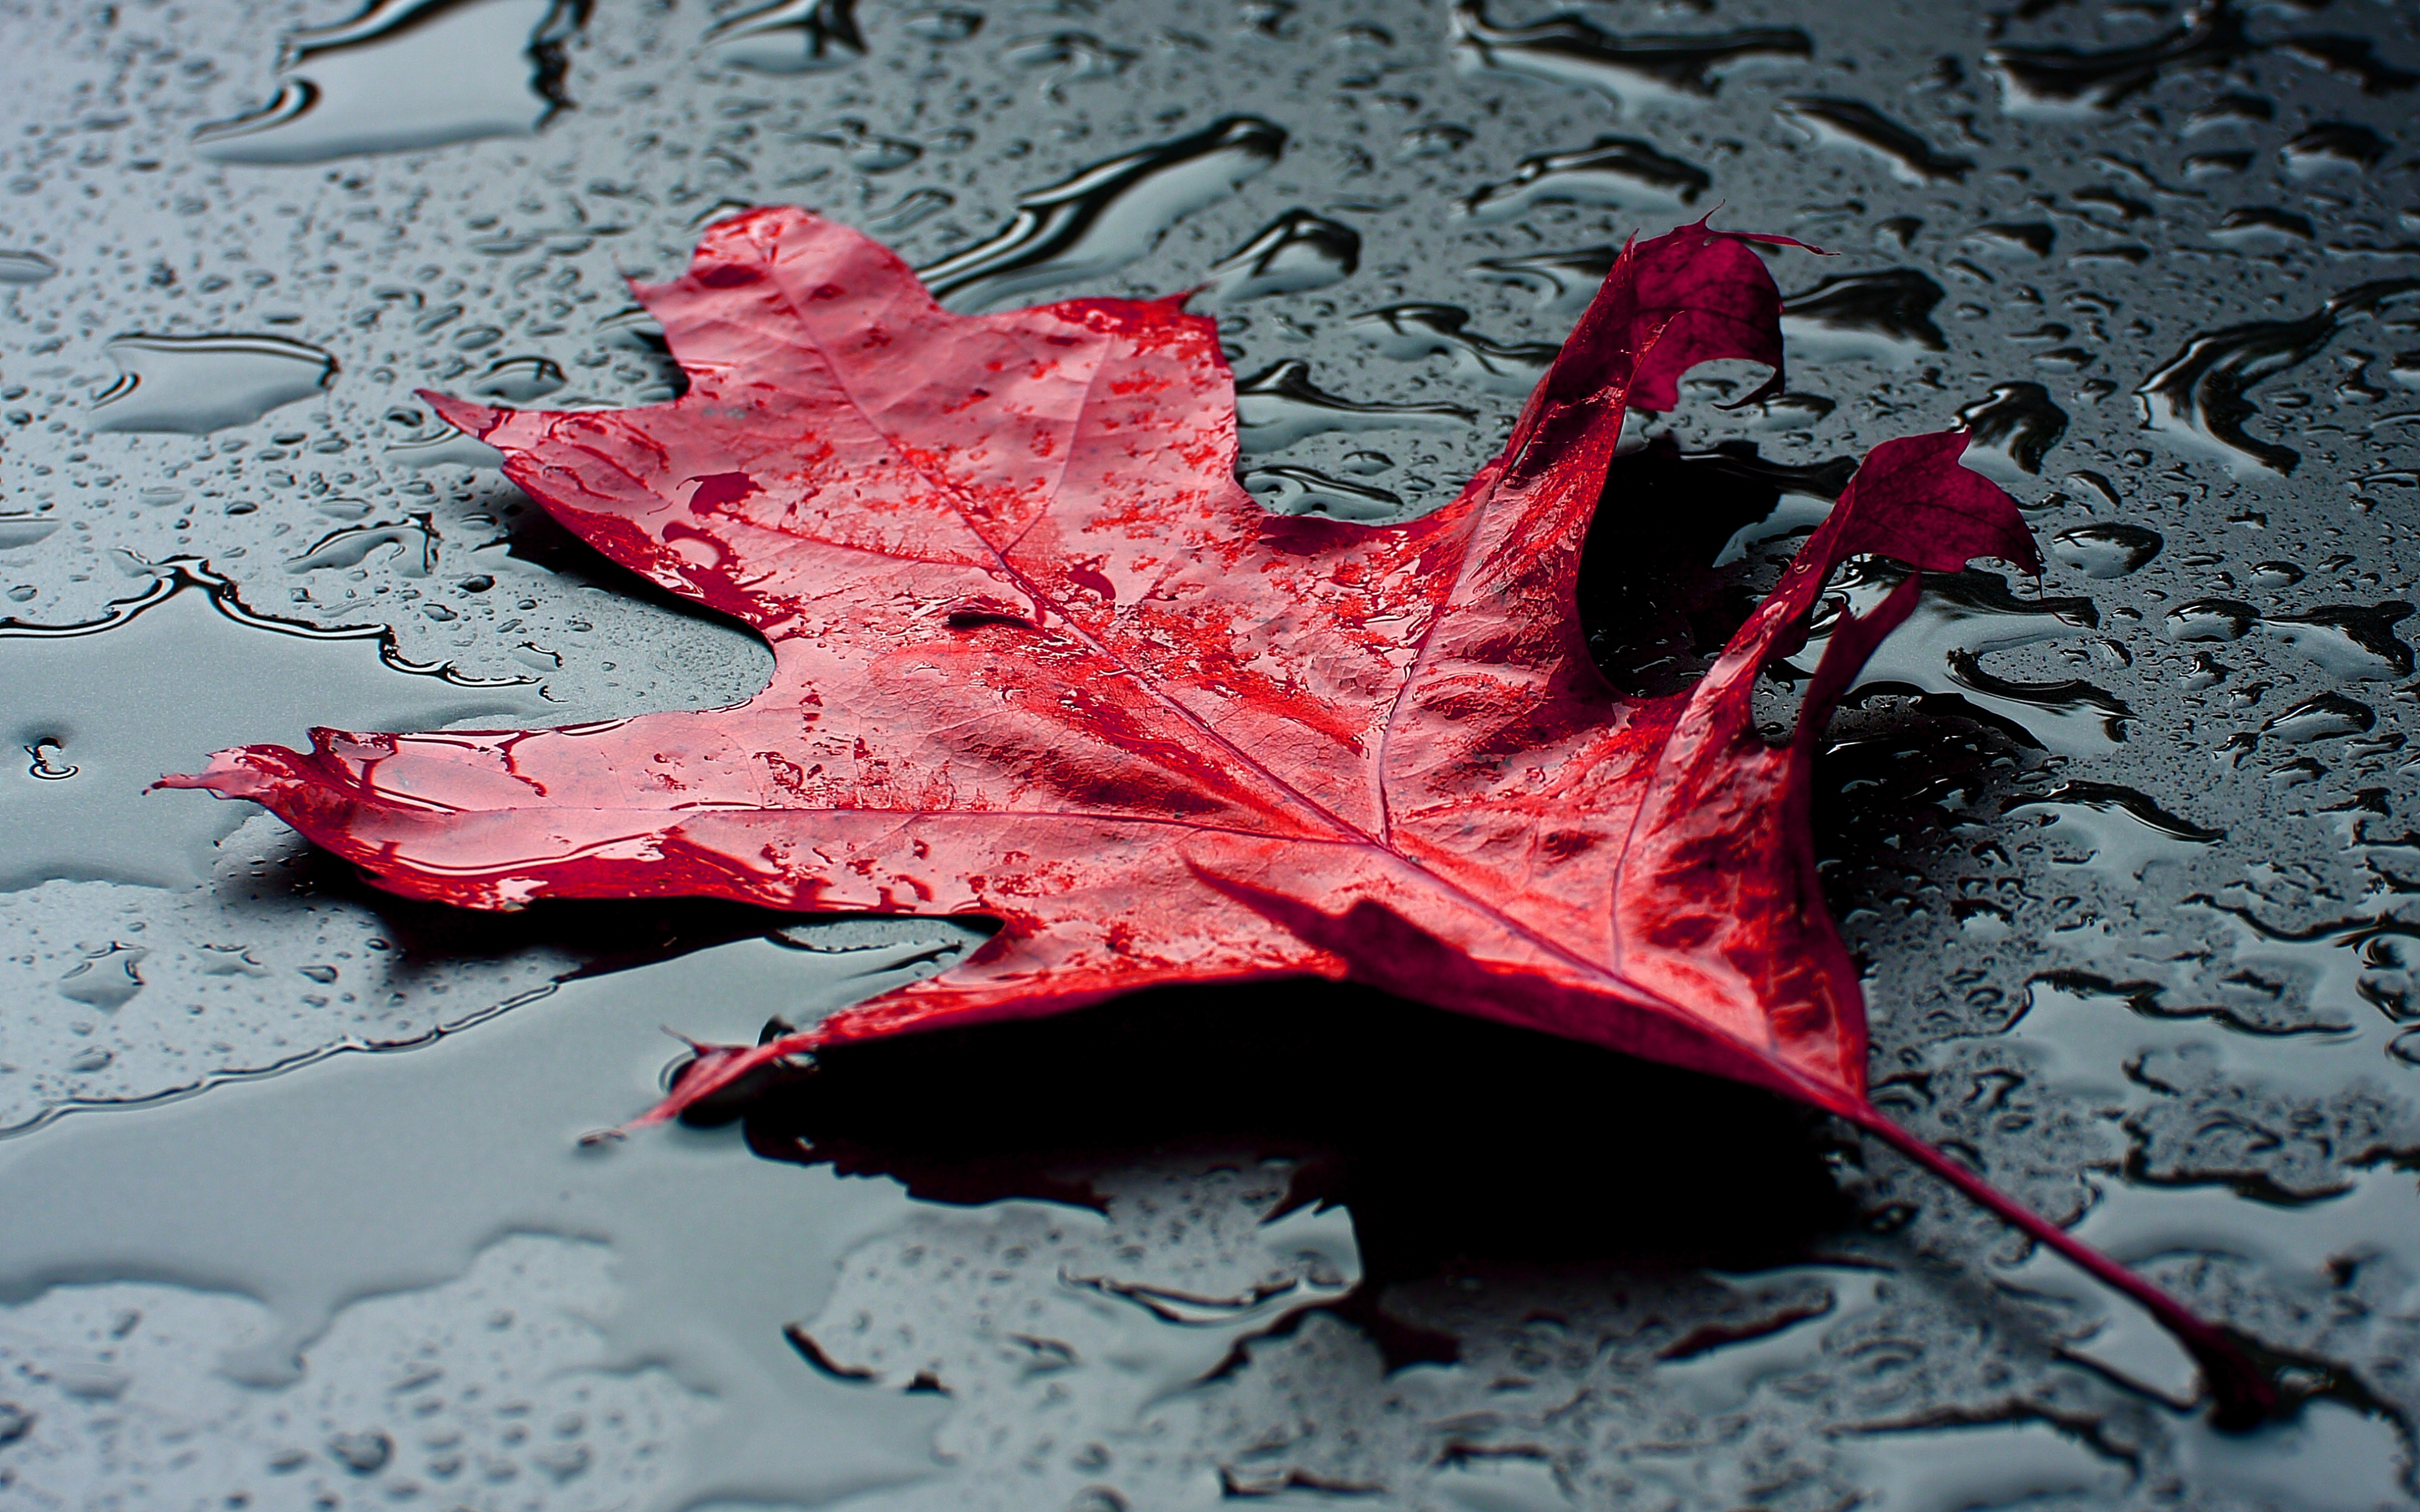 Download Nature, red, maple leaf, autumn, fall, water drops wallpaper, 3840x 4K Ultra HD 16: Widescreen